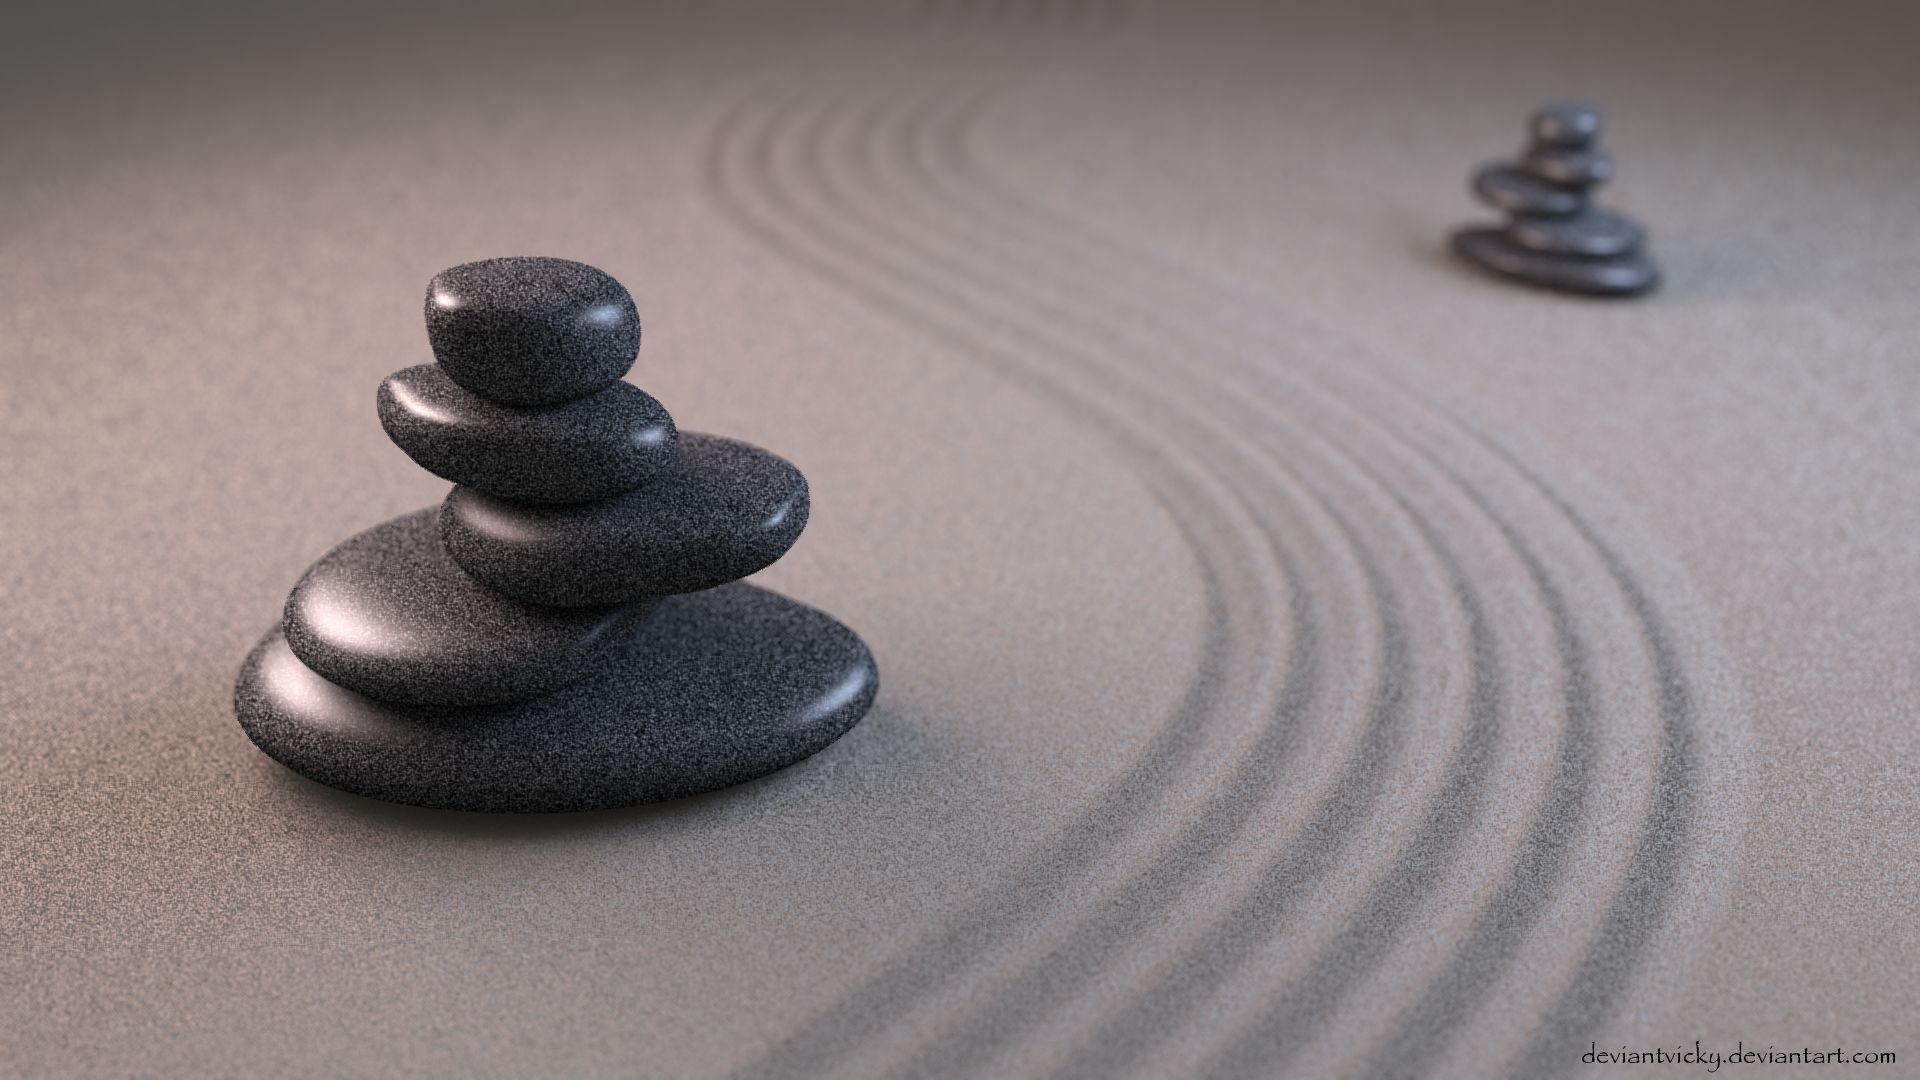 39 Zen HD Wallpapers | Backgrounds - Wallpaper Abyss - Page 2